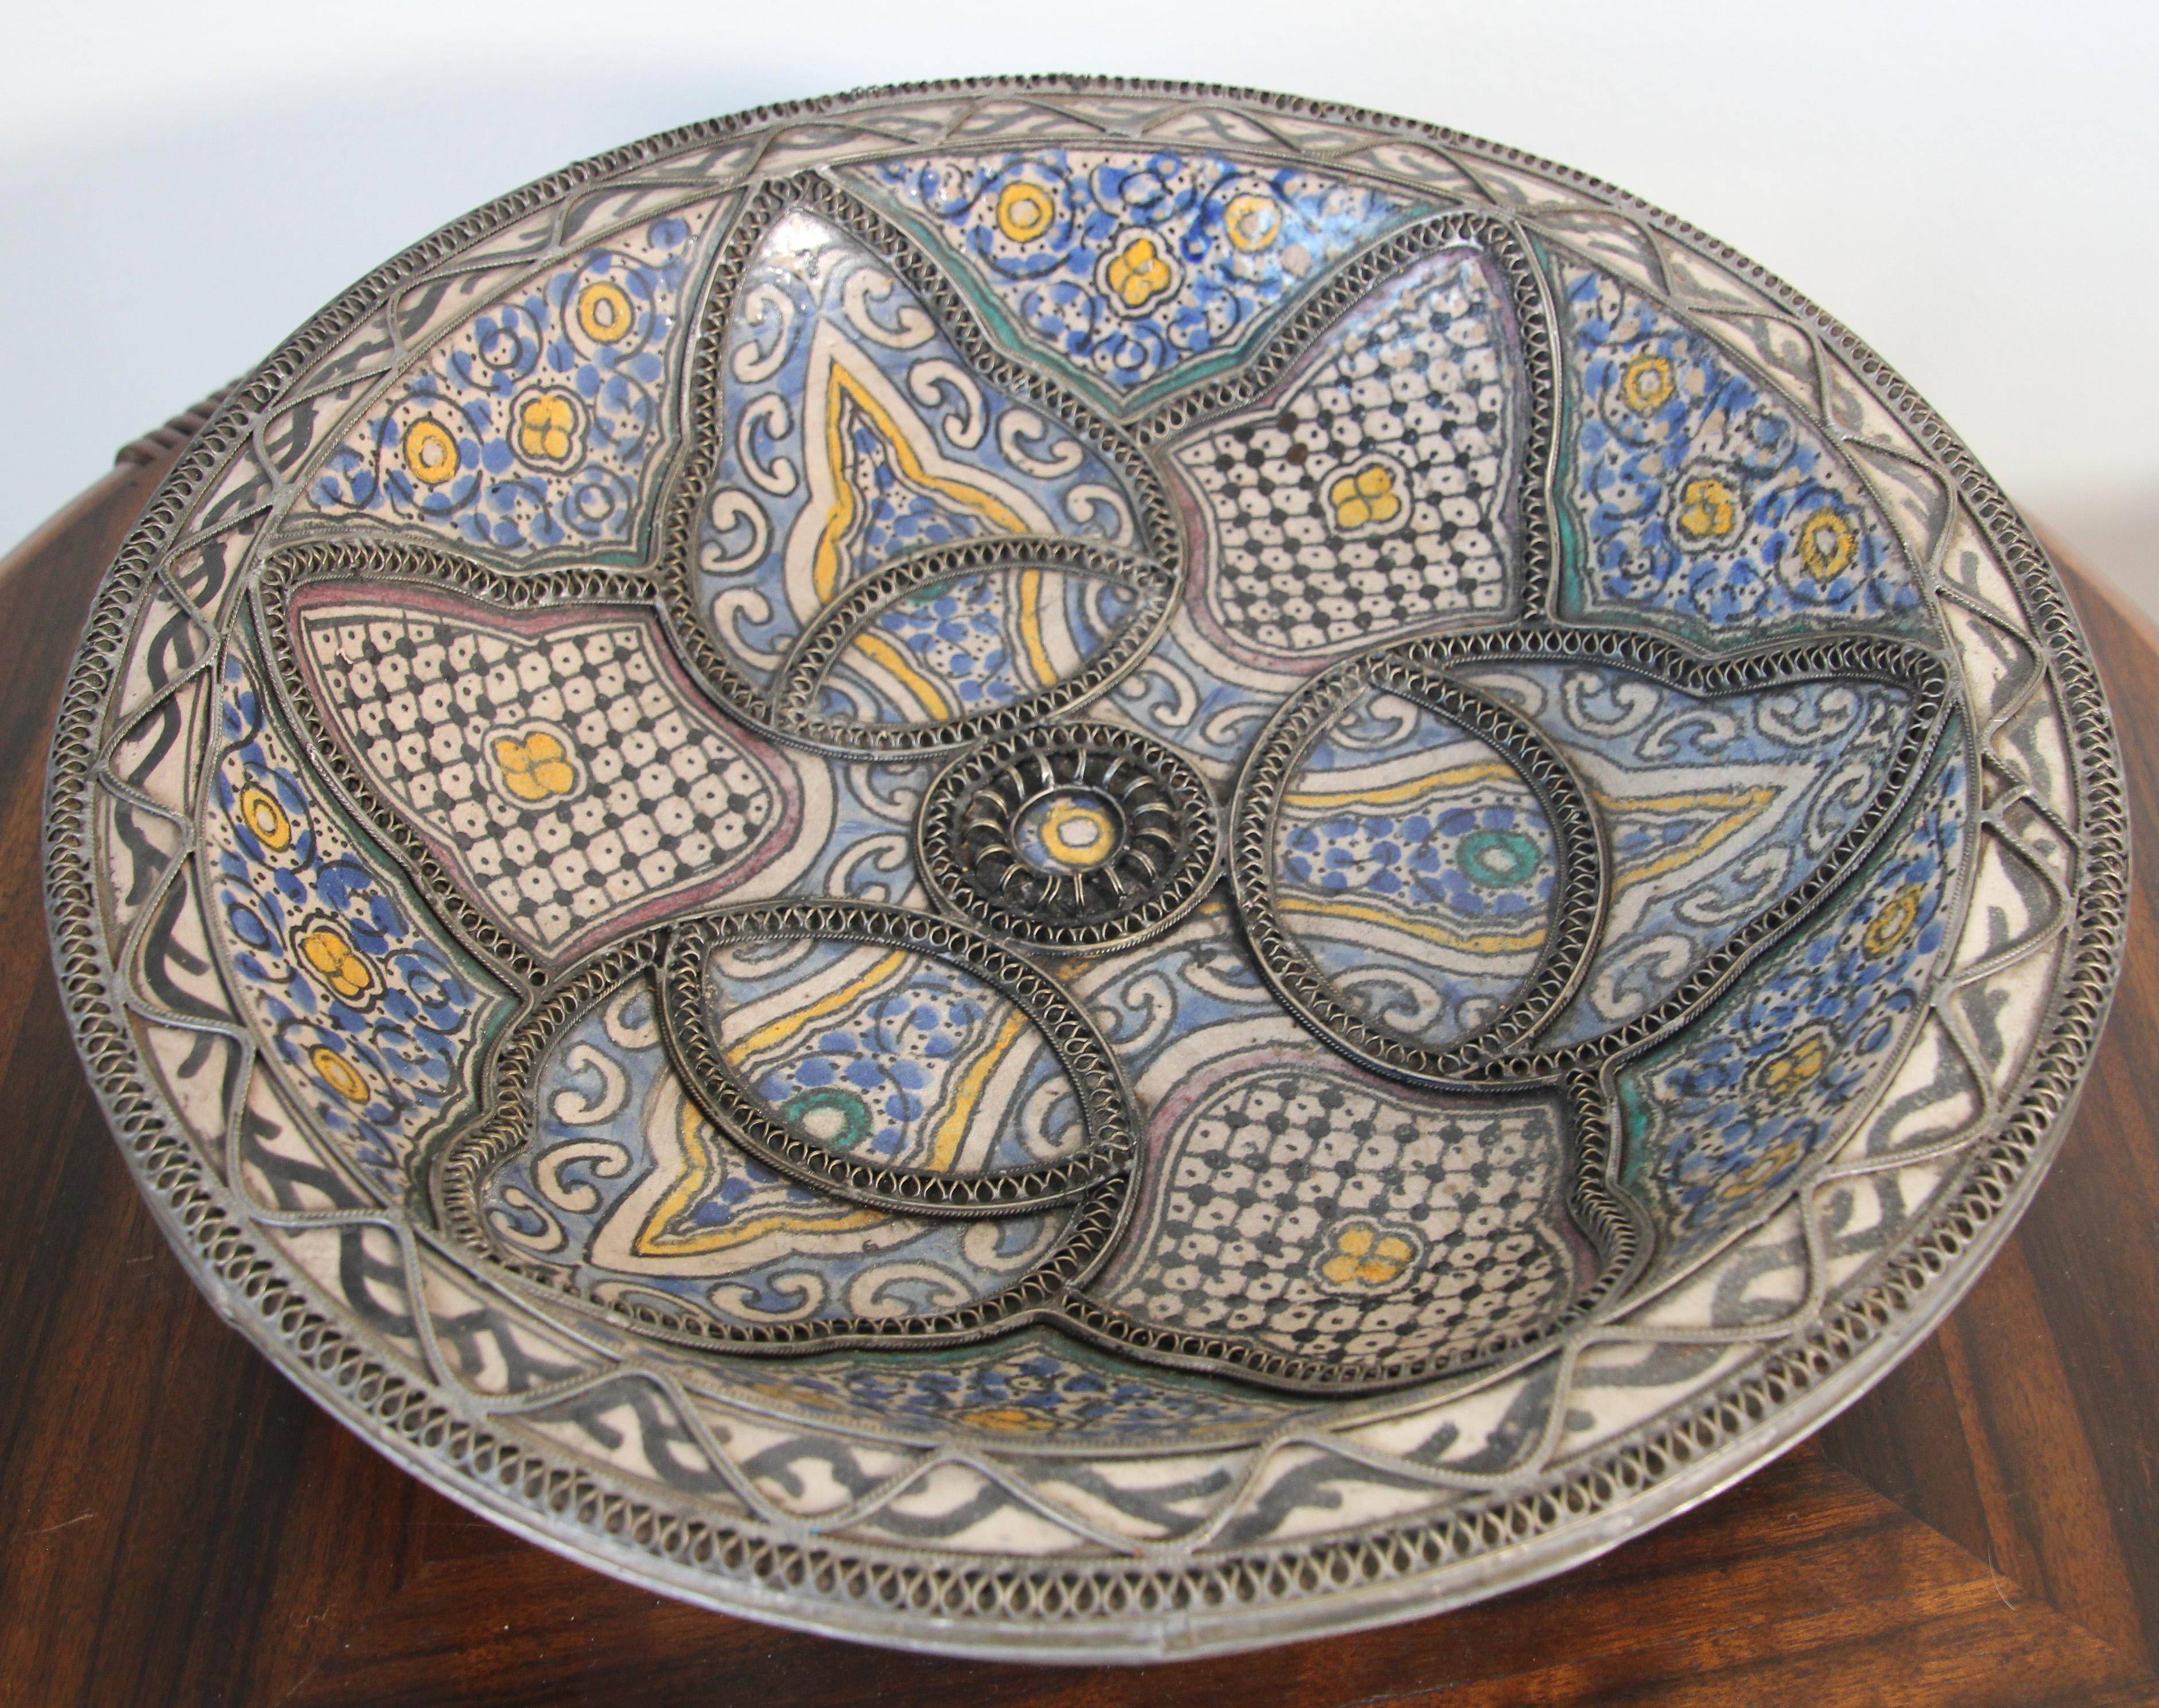 Hand-Crafted Decorative Moroccan Moorish Handcrafted Ceramic Bowl Dish from Fez For Sale